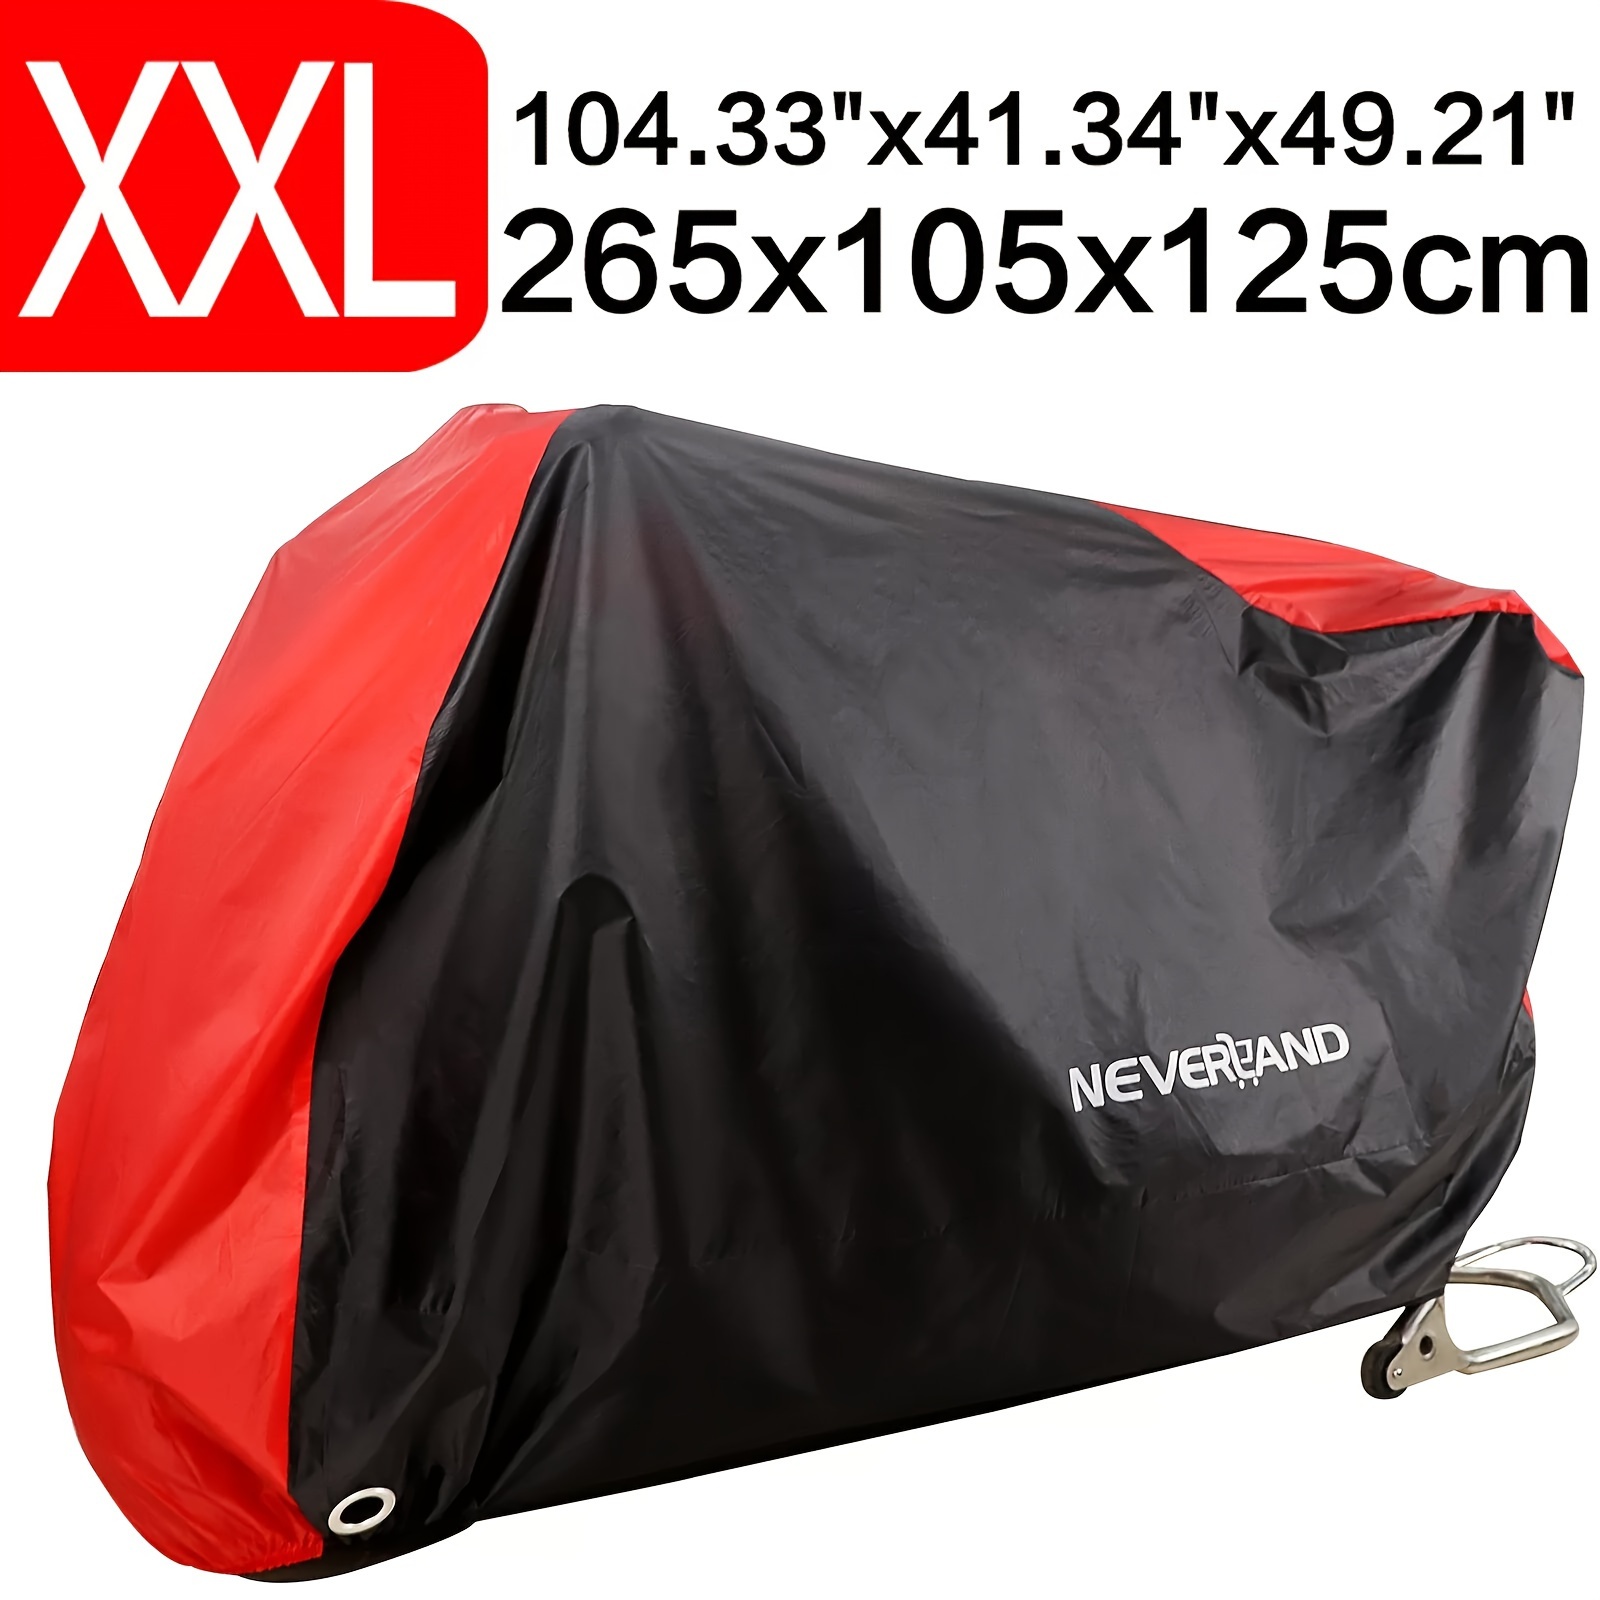 

Neverland Waterproof Bicycle Motorcycle Cover, All Season Dustproof Uv Protective Outdoor Indoor Scooter 190t Wear-resistant Fabric Motorbike Cover 104.33*41.34*49.21in